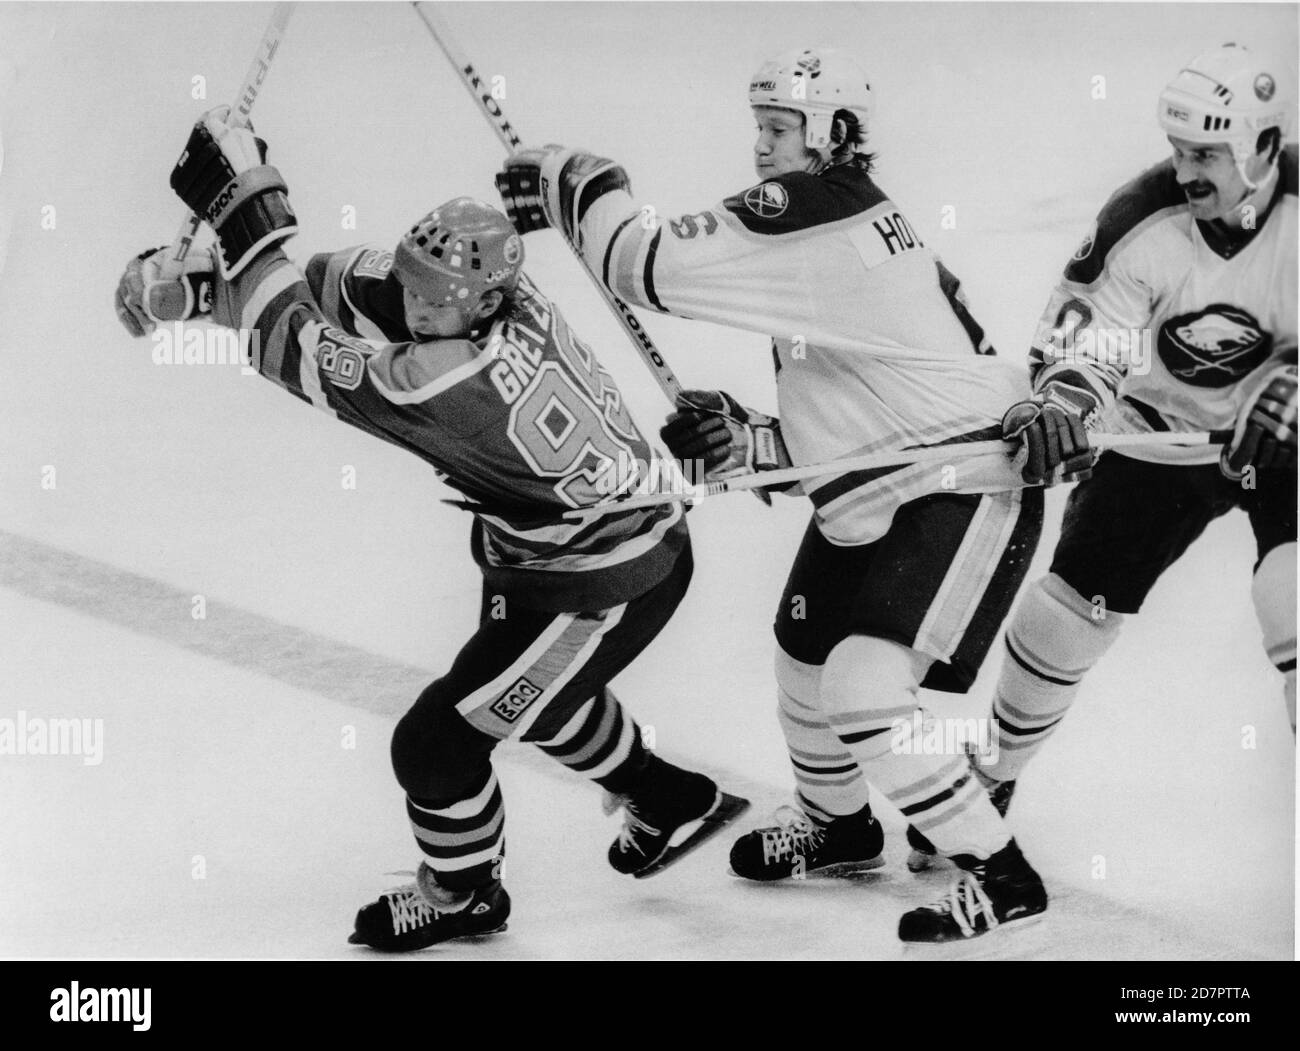 Edmonton Oilers Wayne Gretzky, left, (99)  is checked by Buffalo Sabres Phil Housley, center, and Brent Peterson in Buffalo, New York on January 13, 1985. Photo by Francis Specker Stock Photo